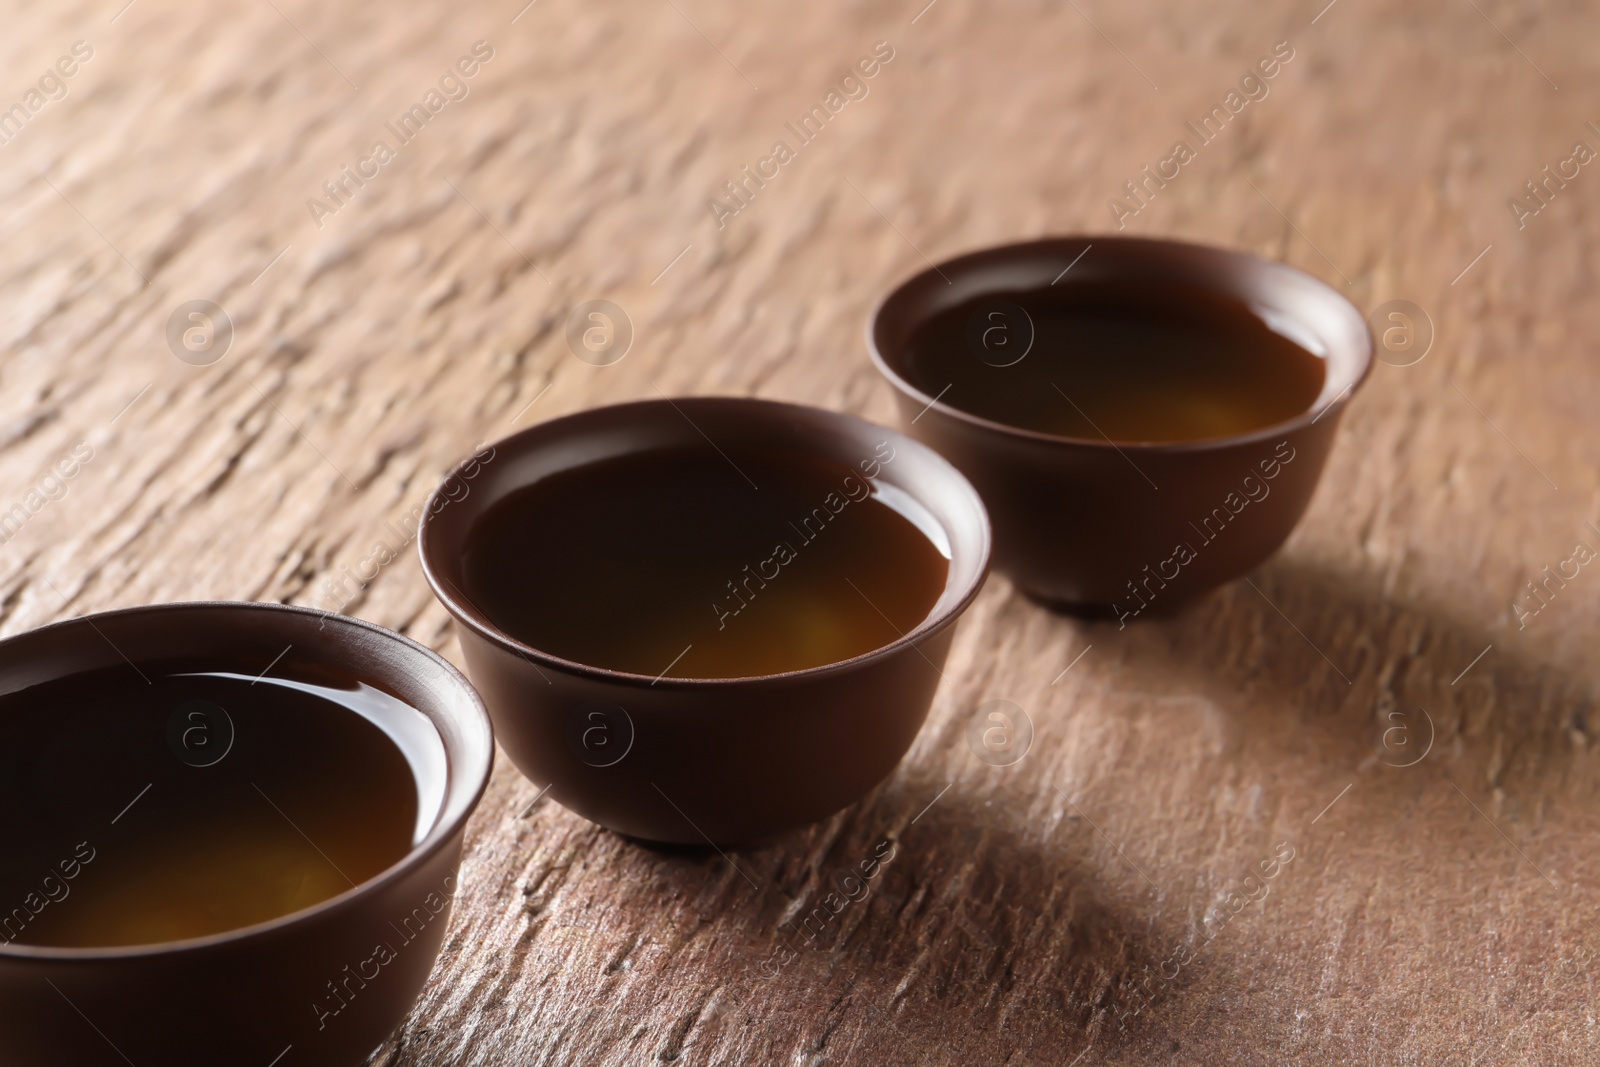 Photo of Cups of Tie Guan Yin oolong tea on table